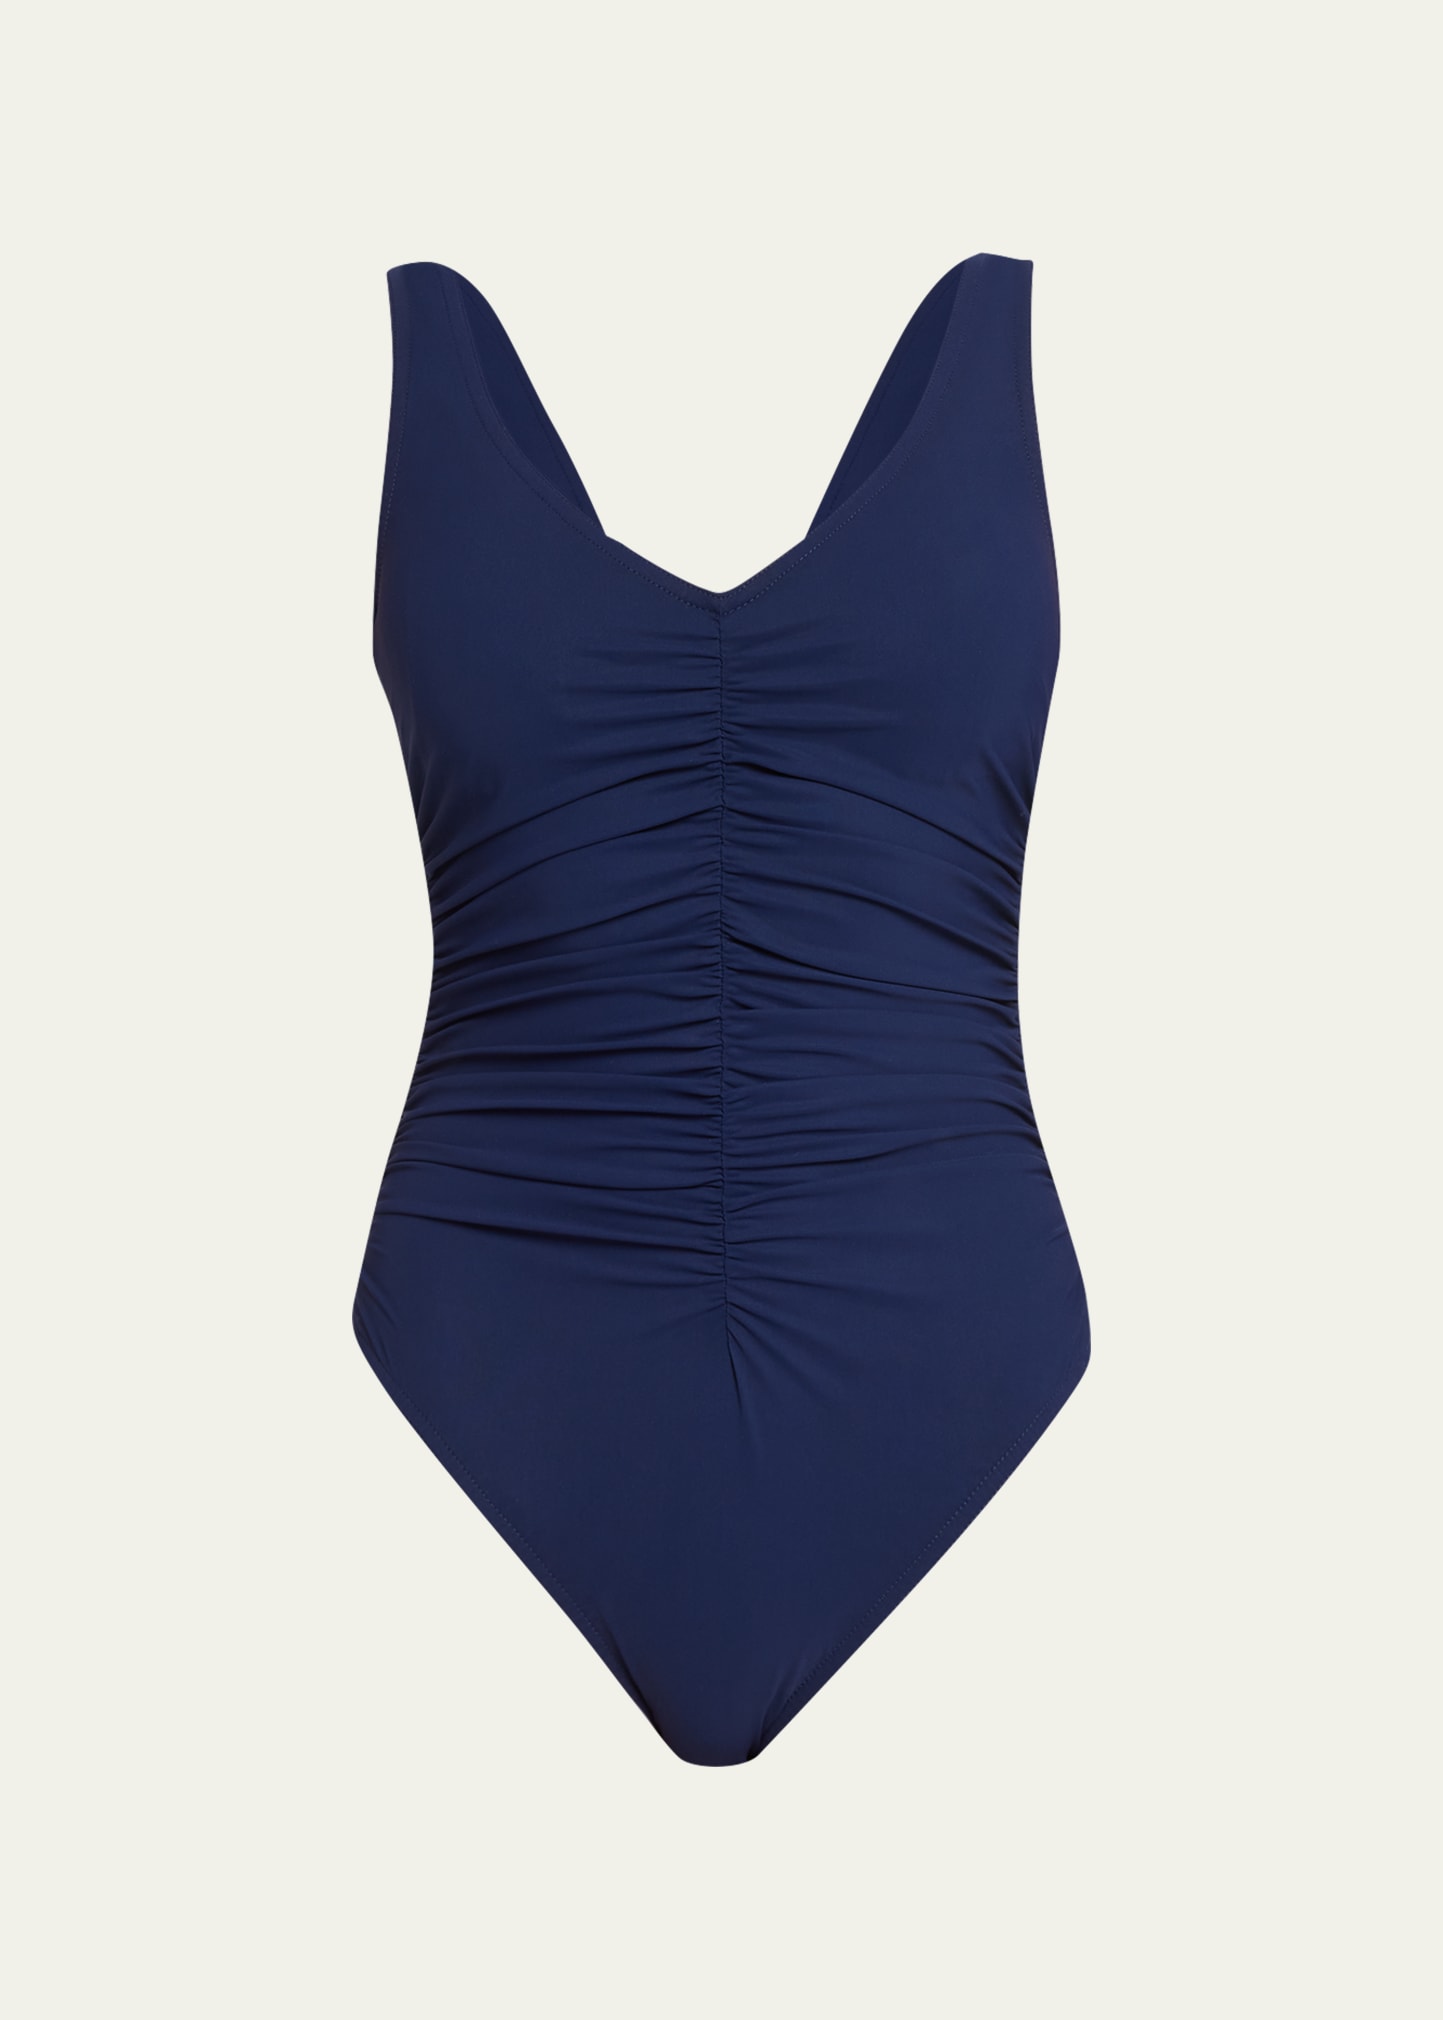 Karla Colletto Basics V-neck One-piece Swimsuit In Navy